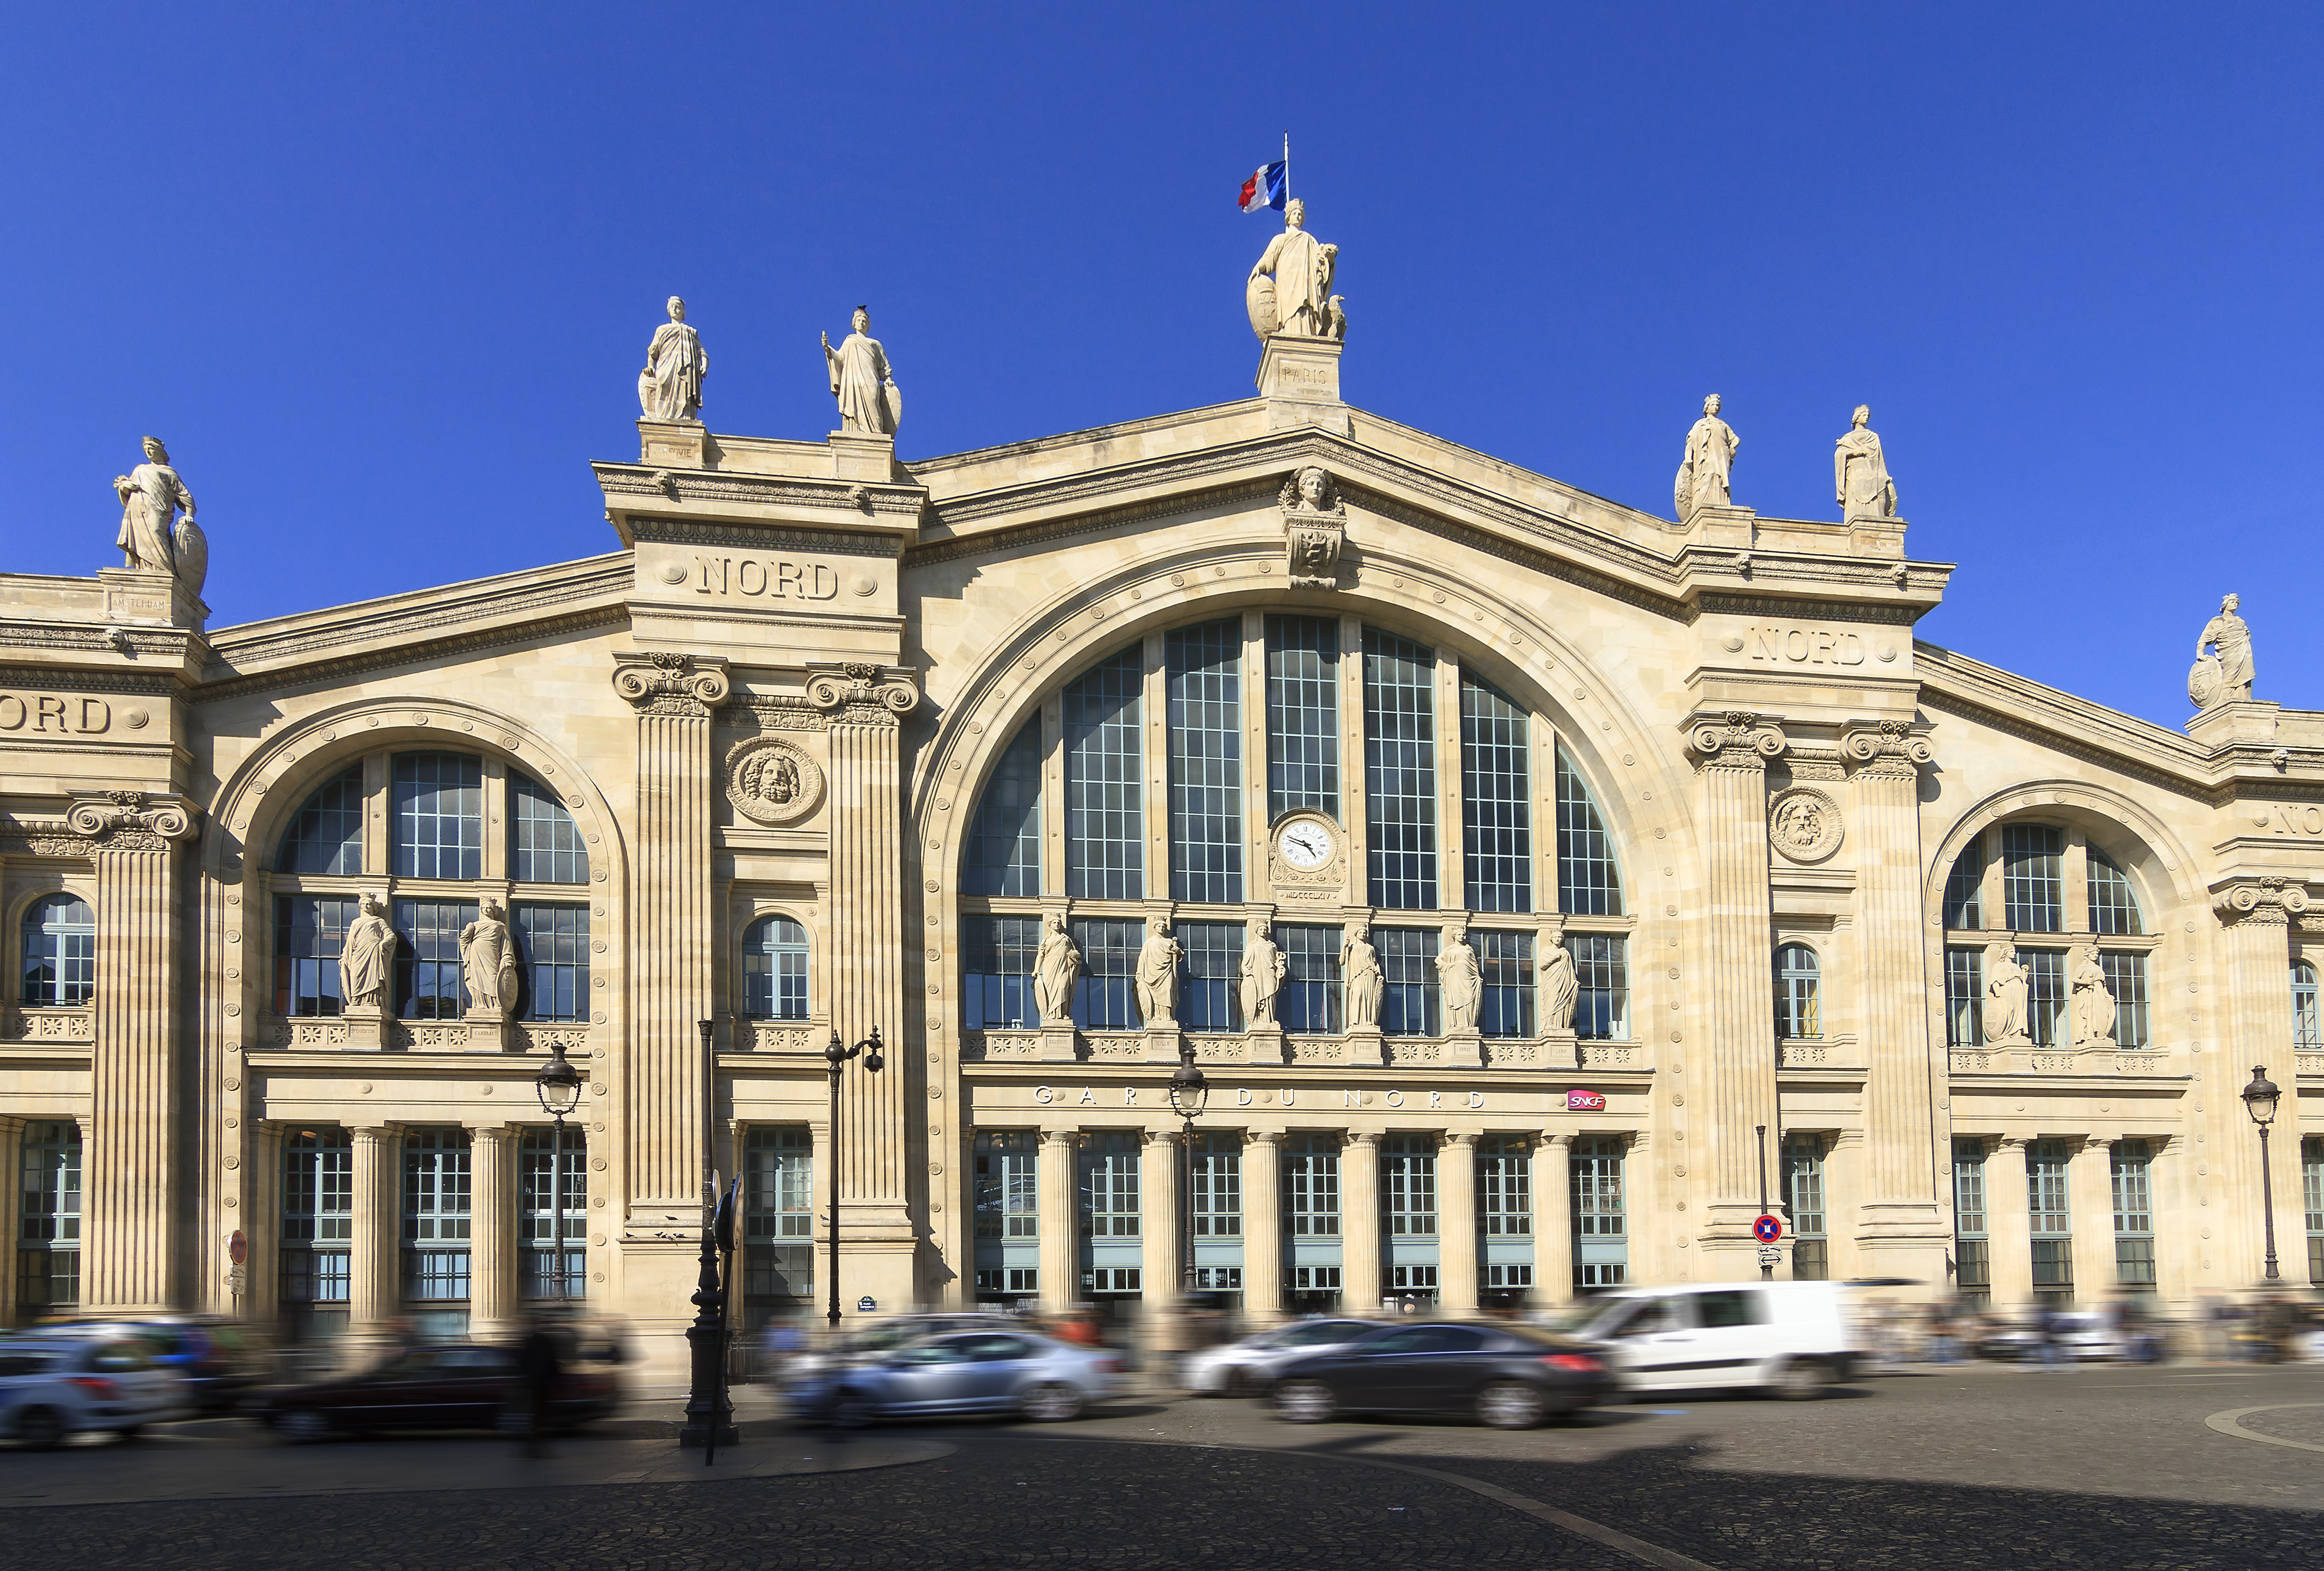 Gare du Nord dates back 178 years